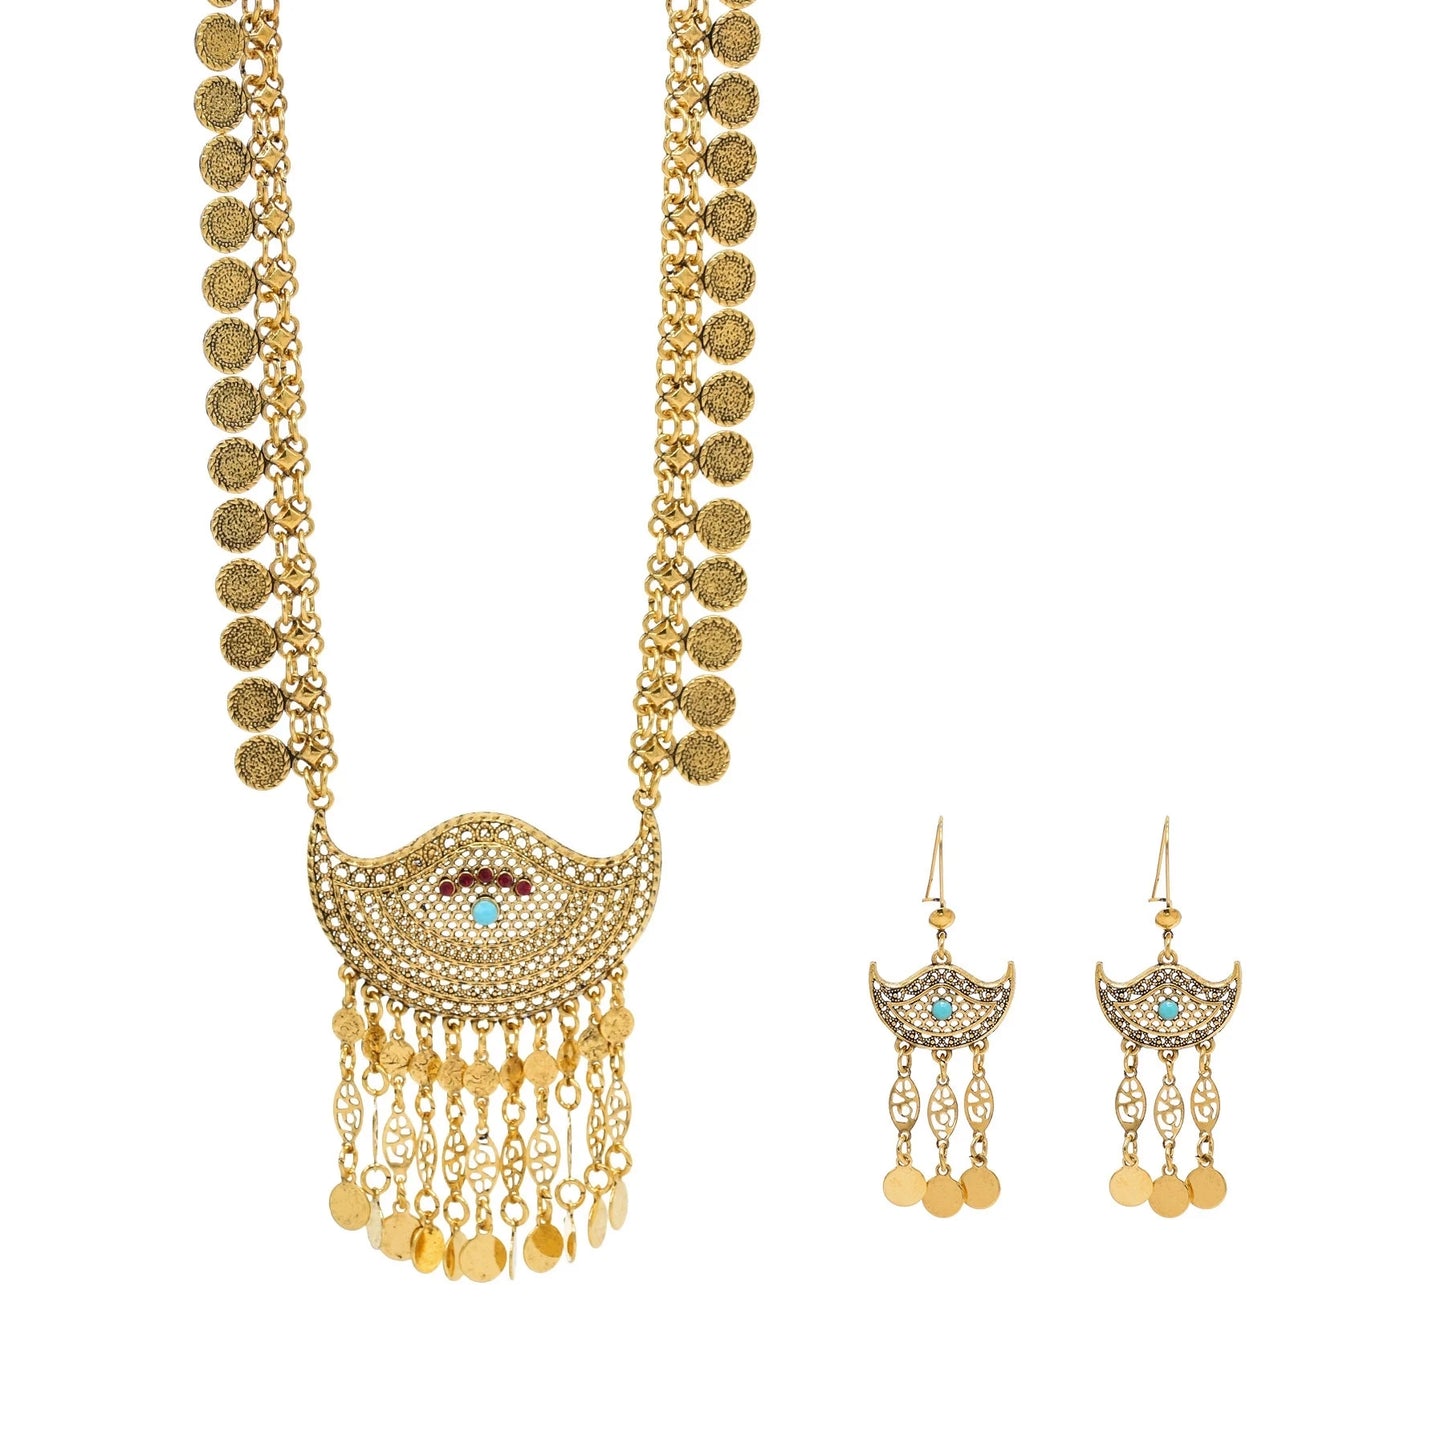 Charms Golden Women Jewelry Sets Bohemian Ethnic Tassel Coins Pendant Necklace Sets Statement Indian Moon Earrings 2 Piece Sets - Hiron Store